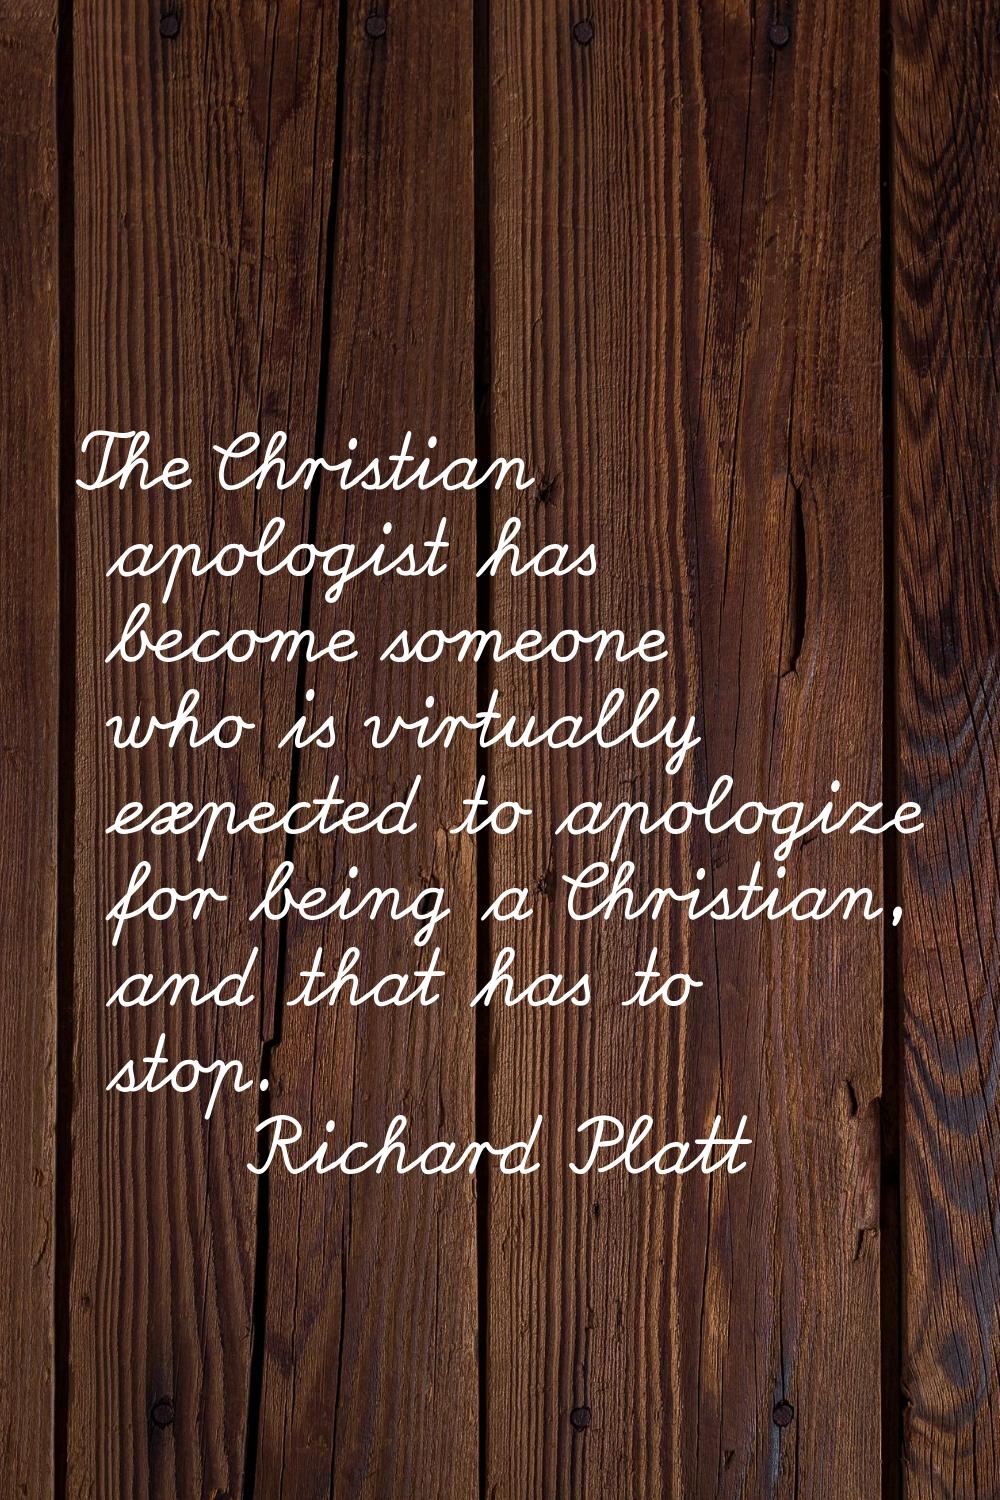 The Christian apologist has become someone who is virtually expected to apologize for being a Chris